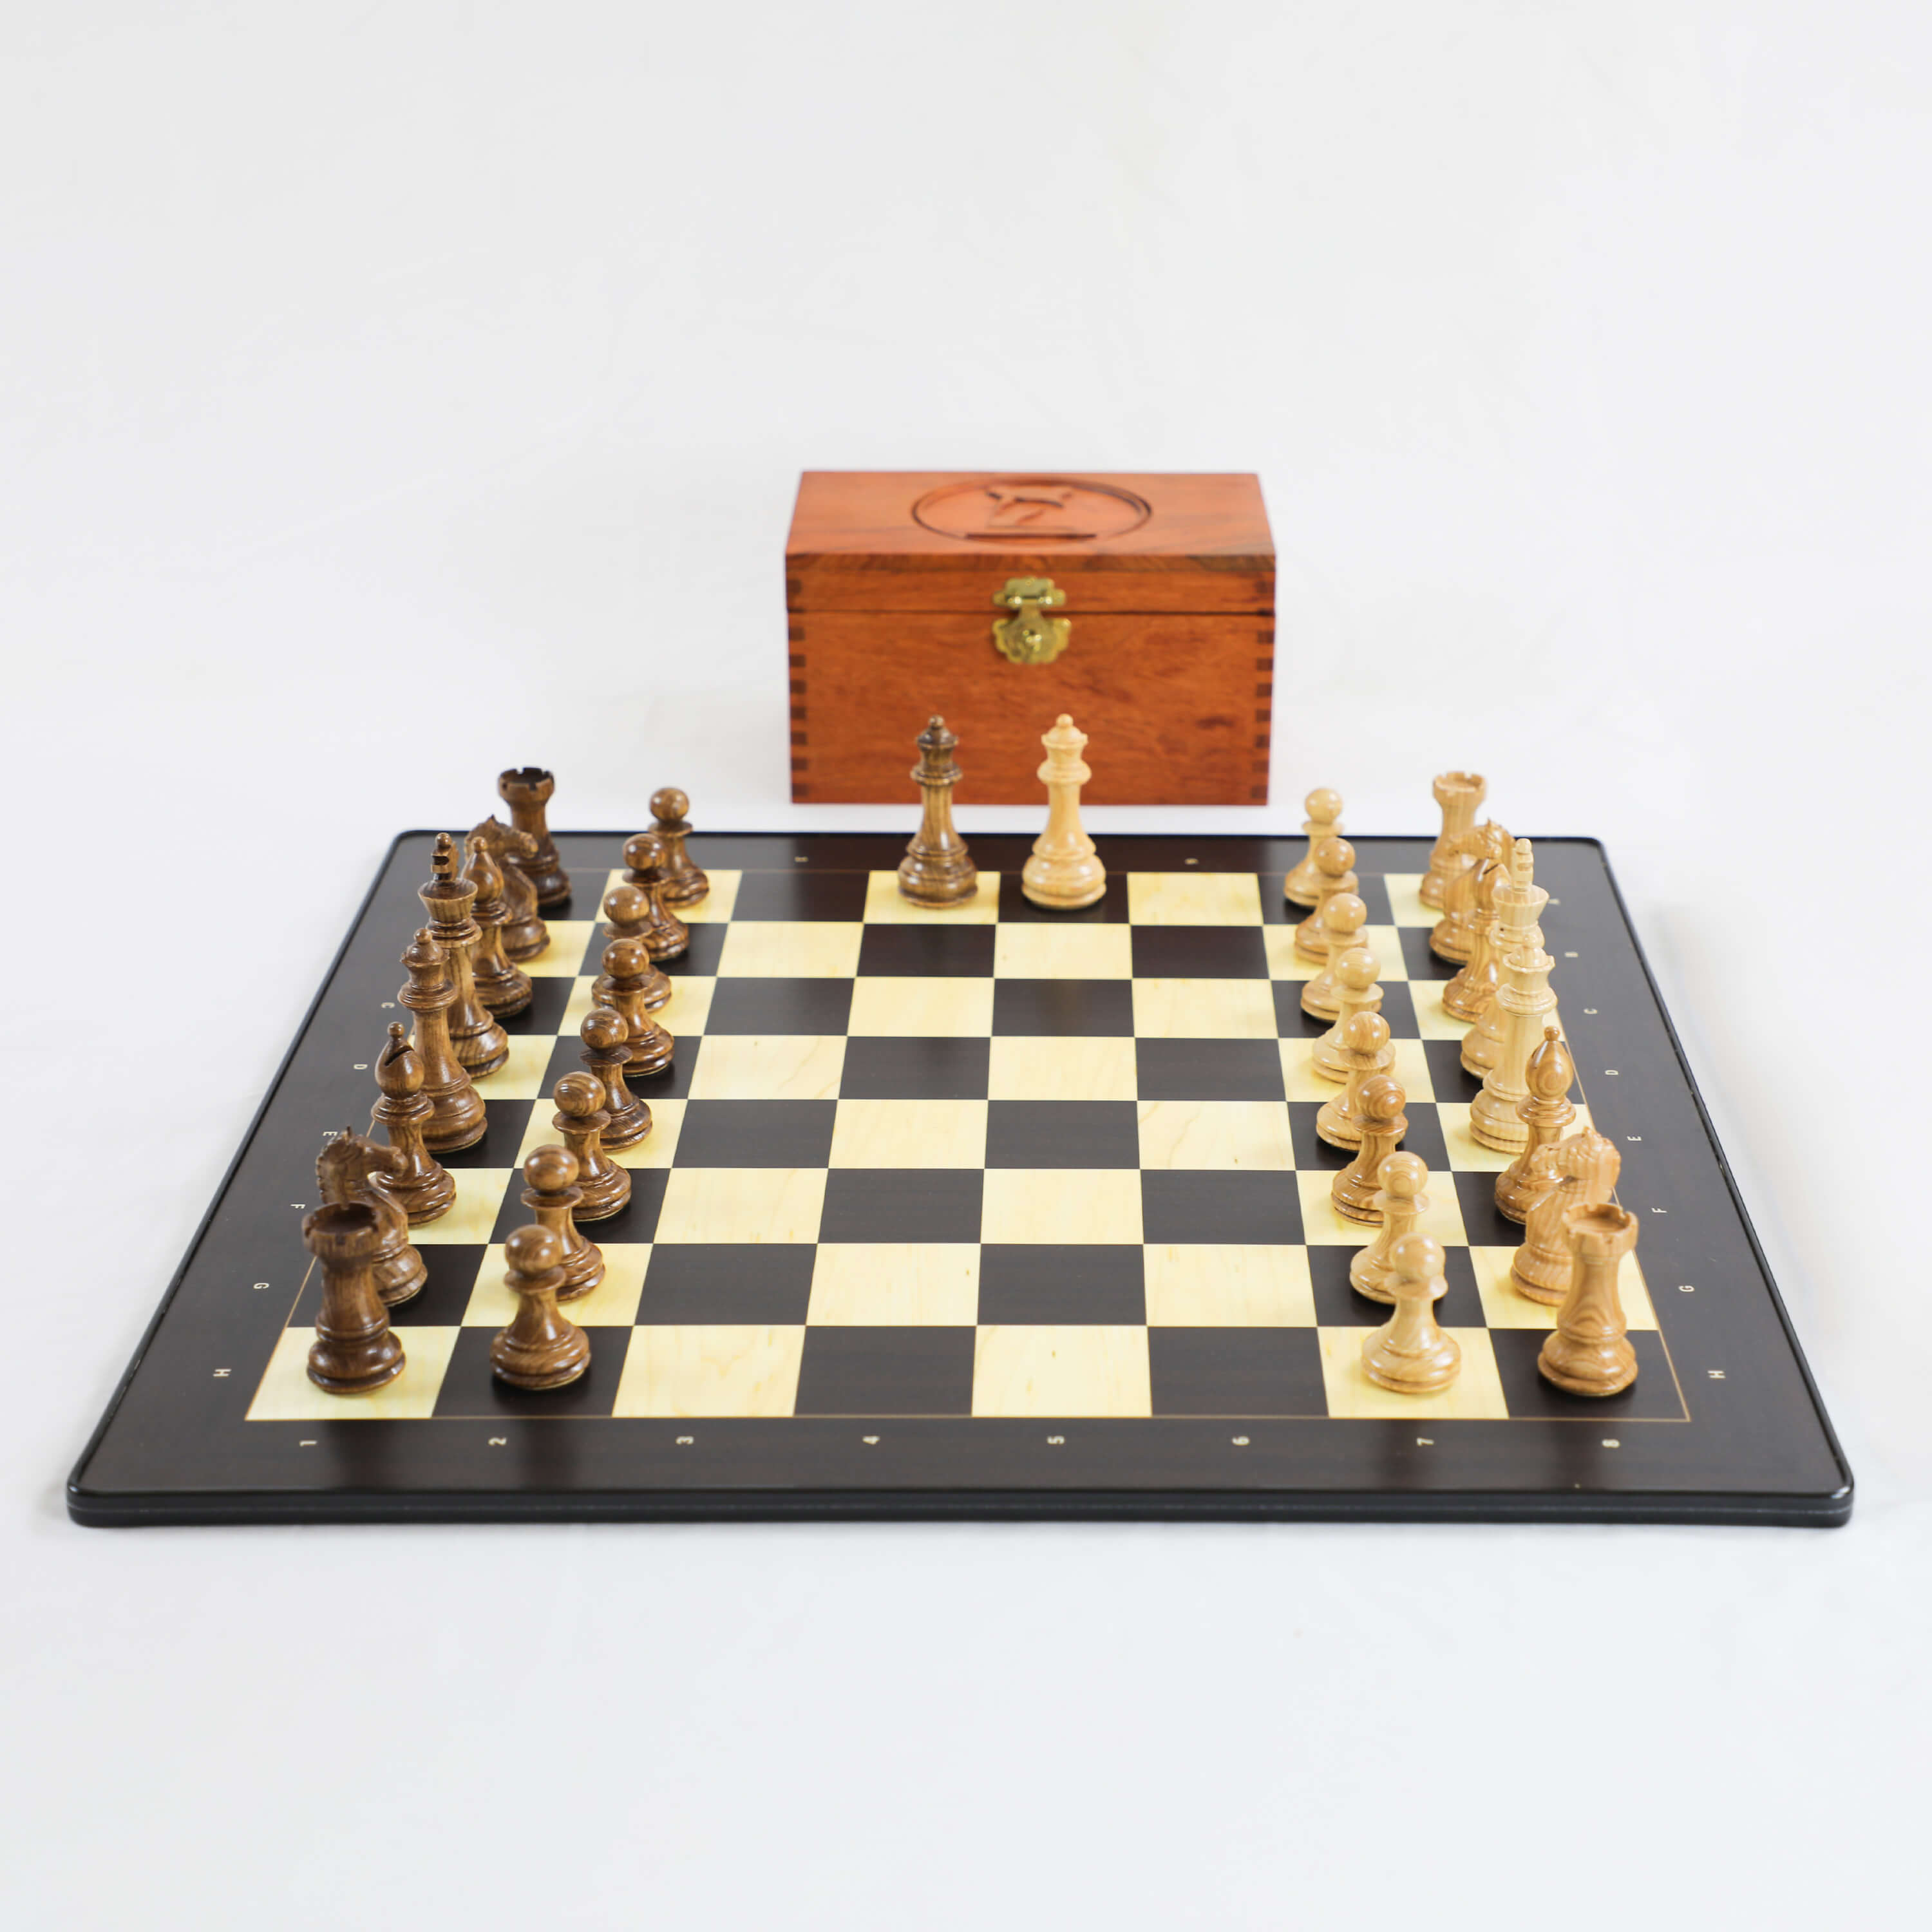 Standard Ebony & Ash Wood Chess Pieces with Wooden Chess Box and Flat Chess Board